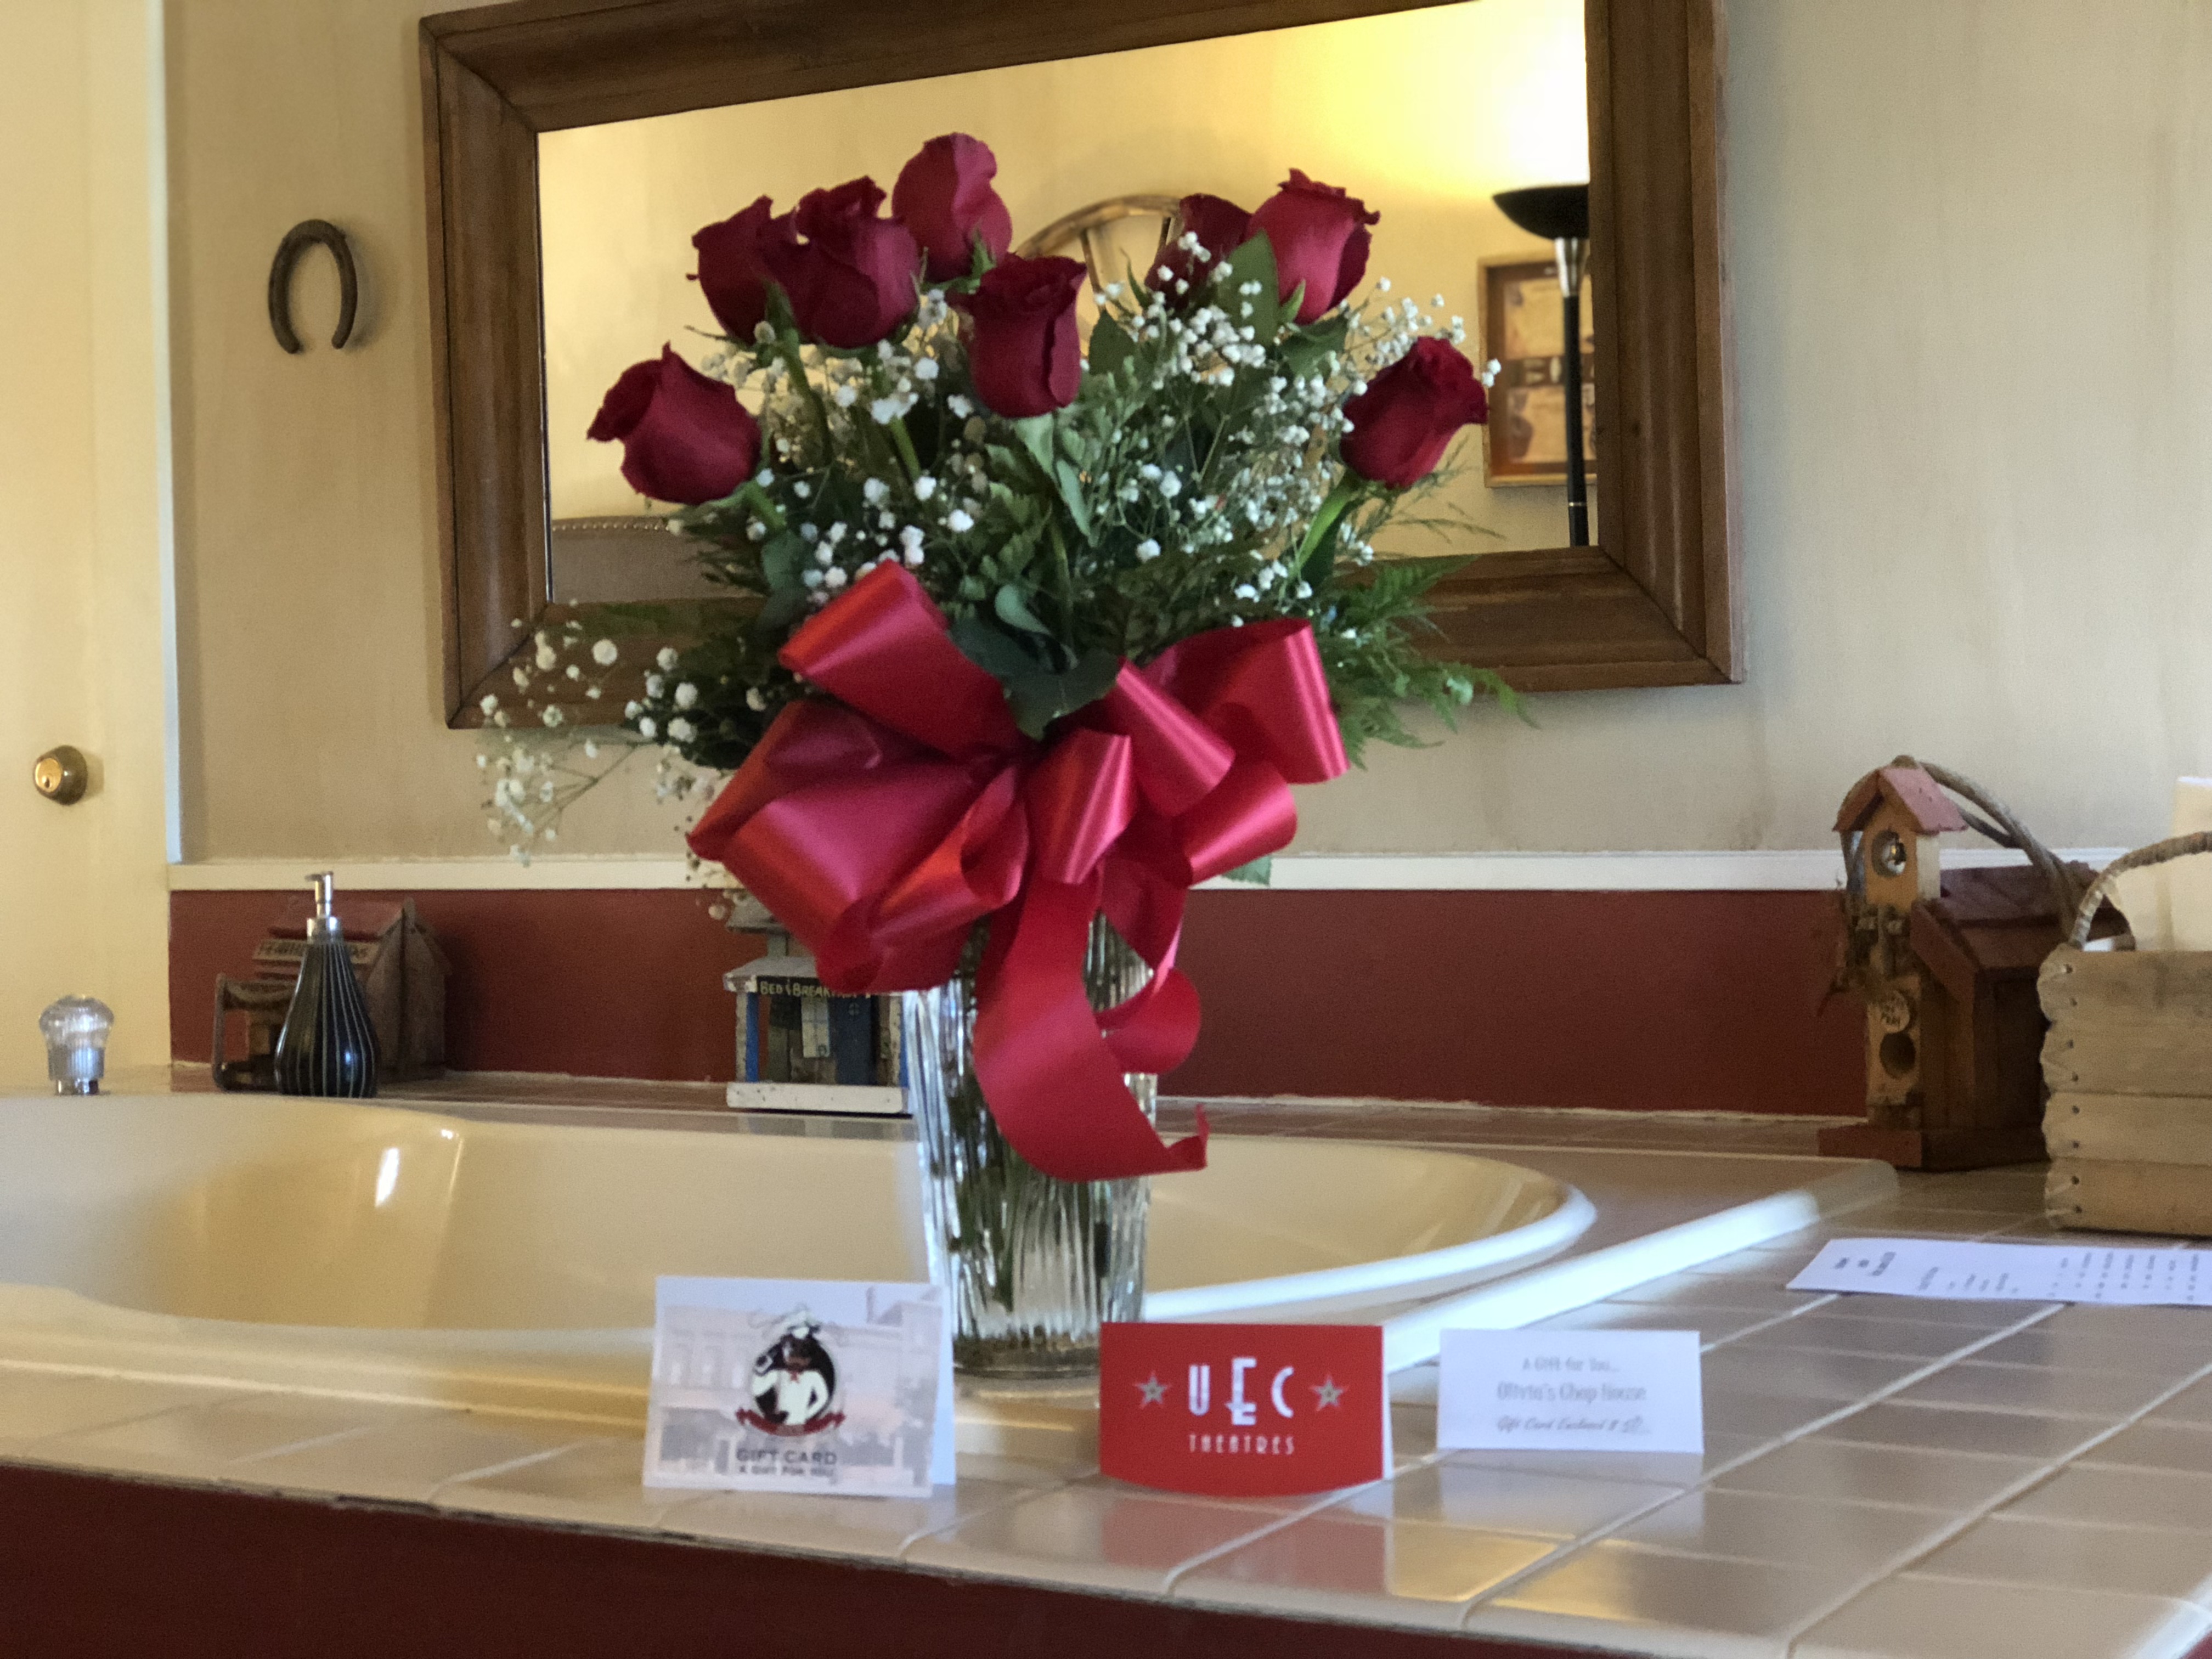 Red roses floral bouquet with gift cards